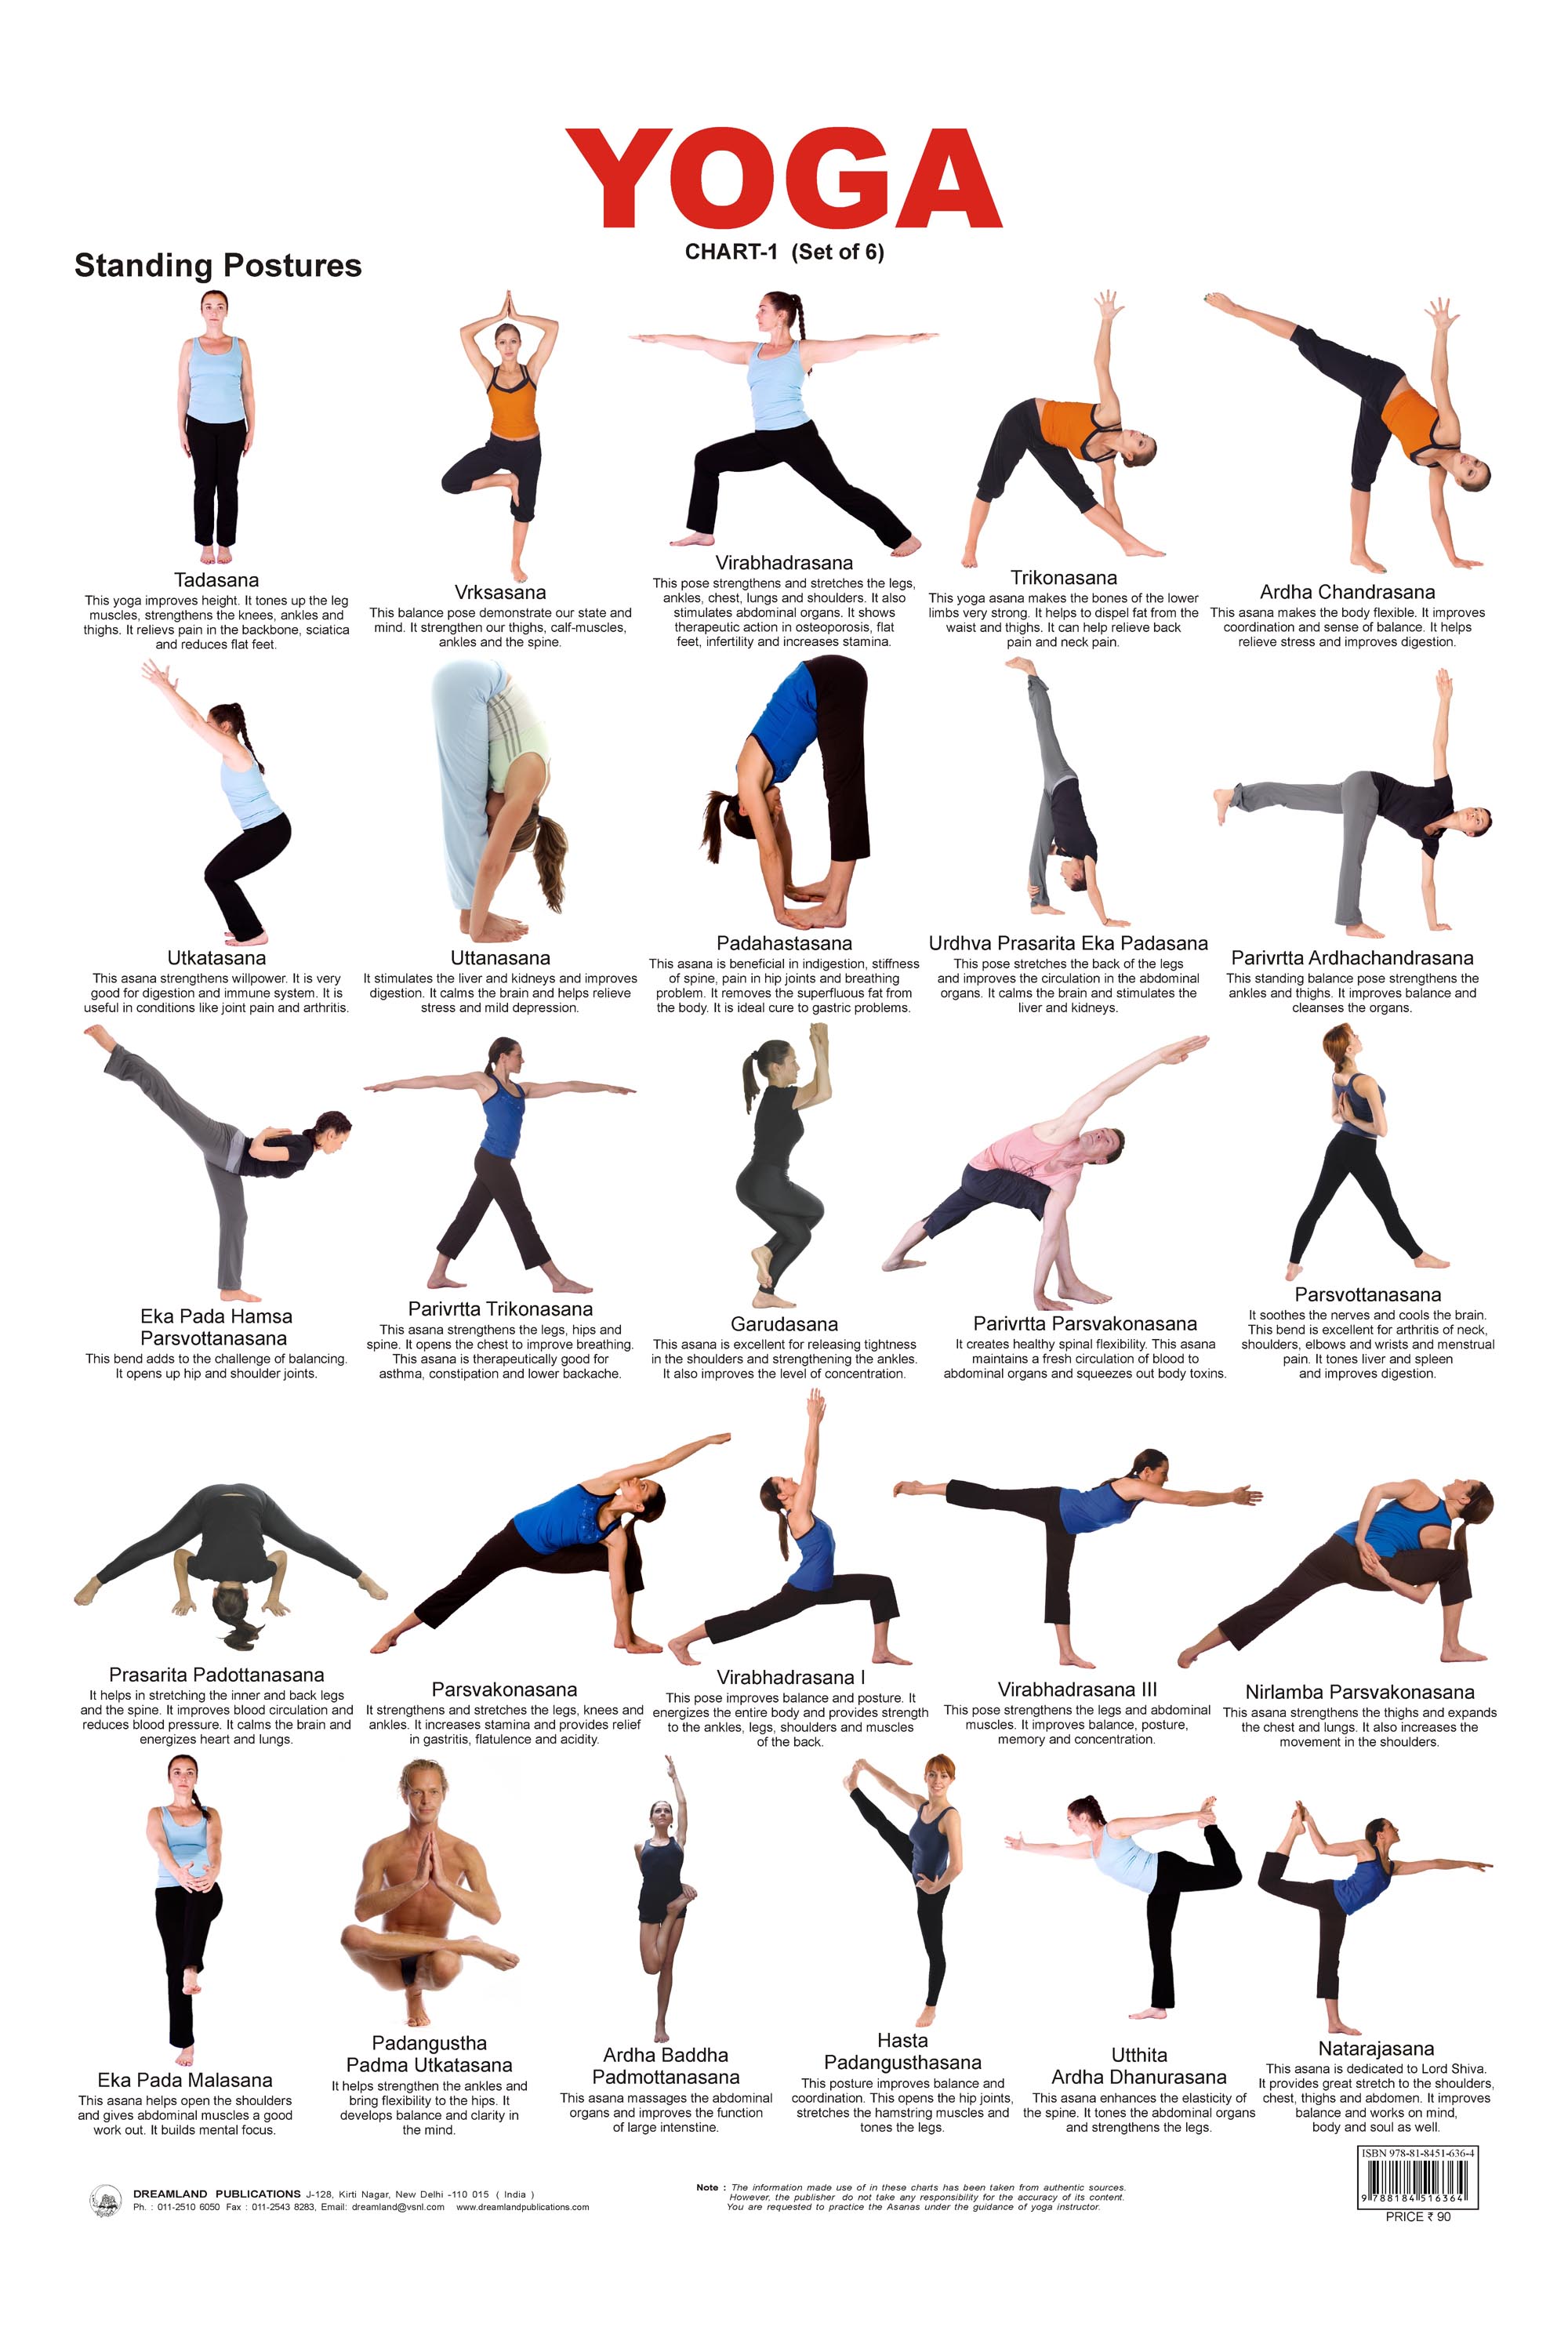 schools  poses Yoga hundred  many picture poses over name different are Yoga. of There a by yoga and